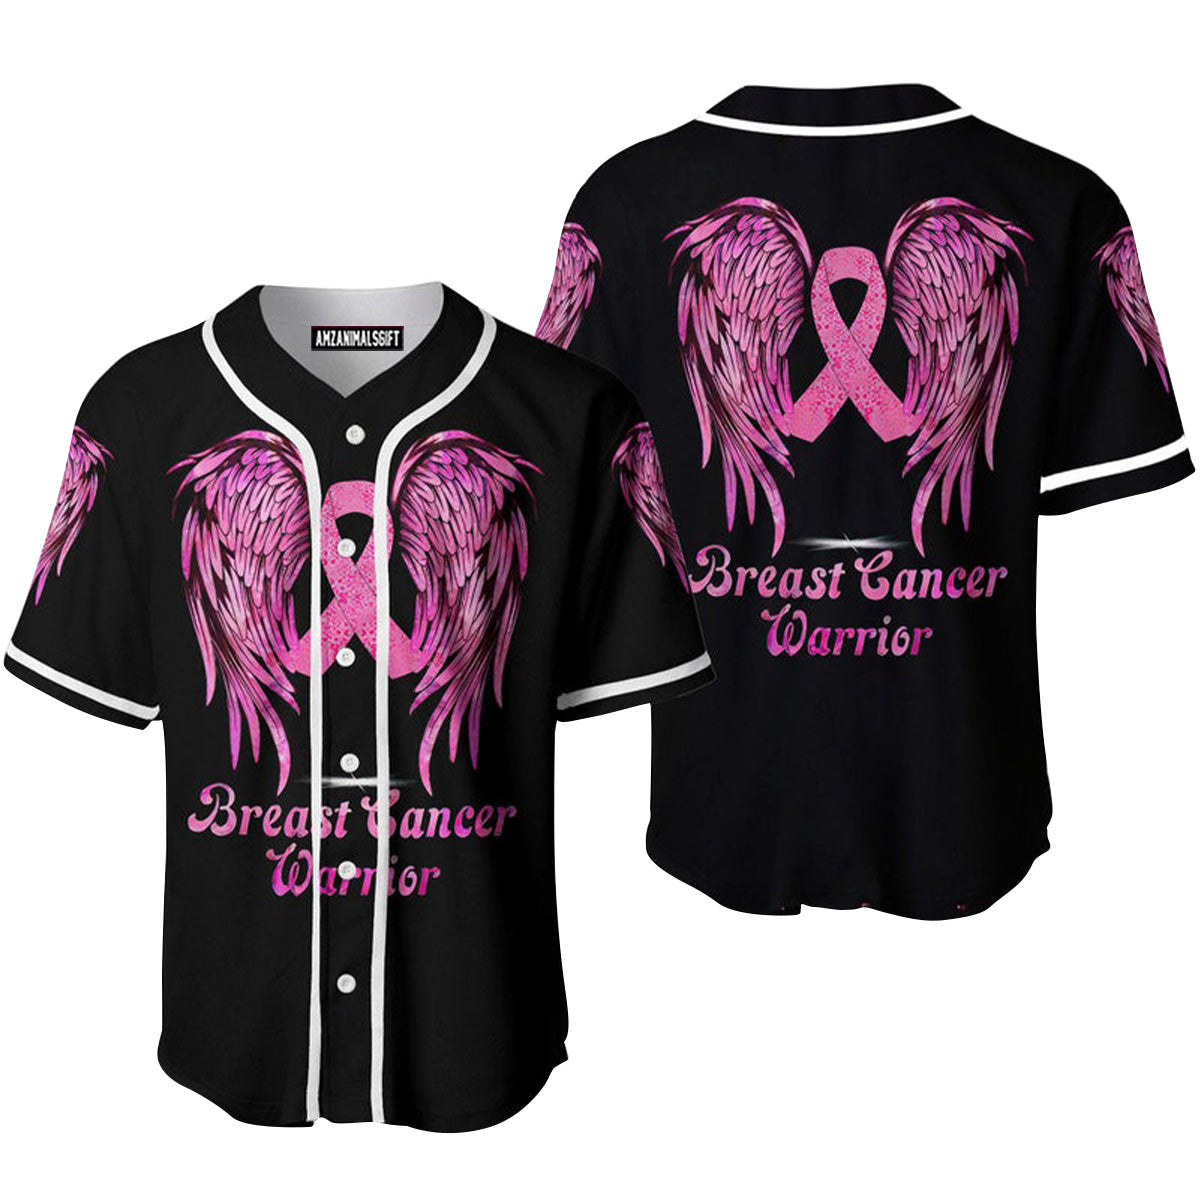 Breast Cancer Warrior Pink Ribbon Angel Wings Baseball Jersey, Perfect Outfit For Men And Women On Breast Cancer Baseball Team Baseball Fans